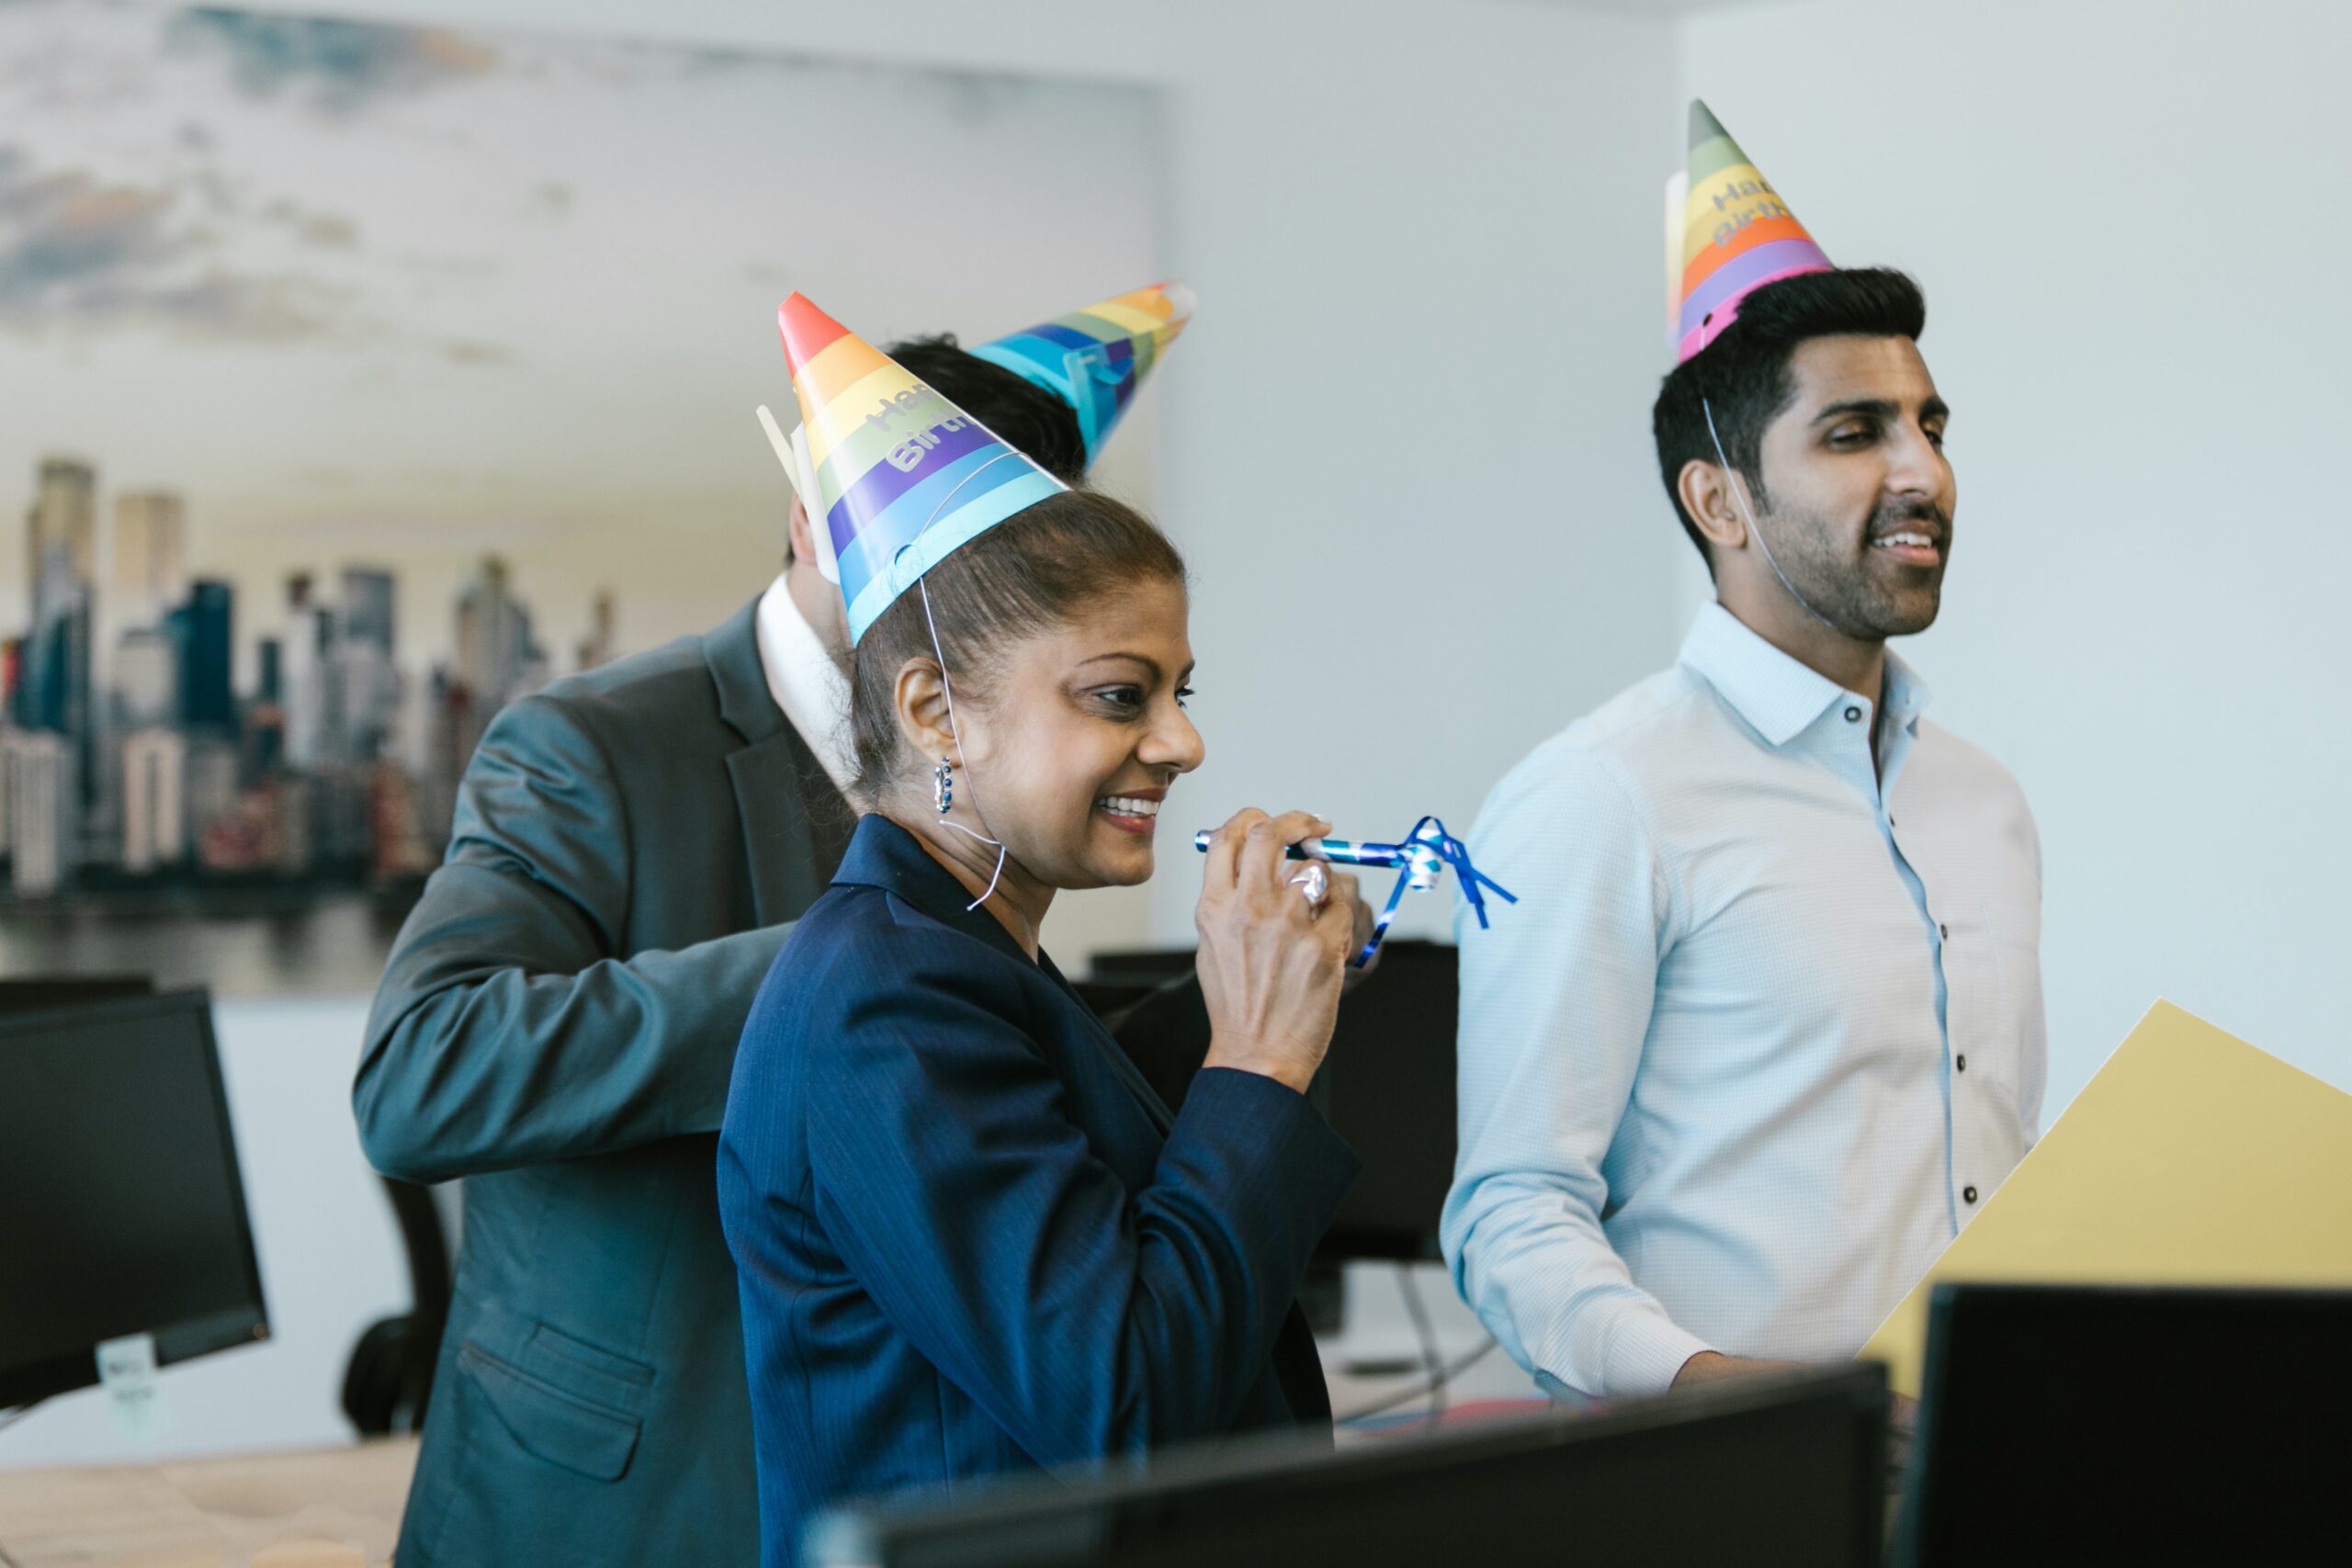 People wearing party hats in office